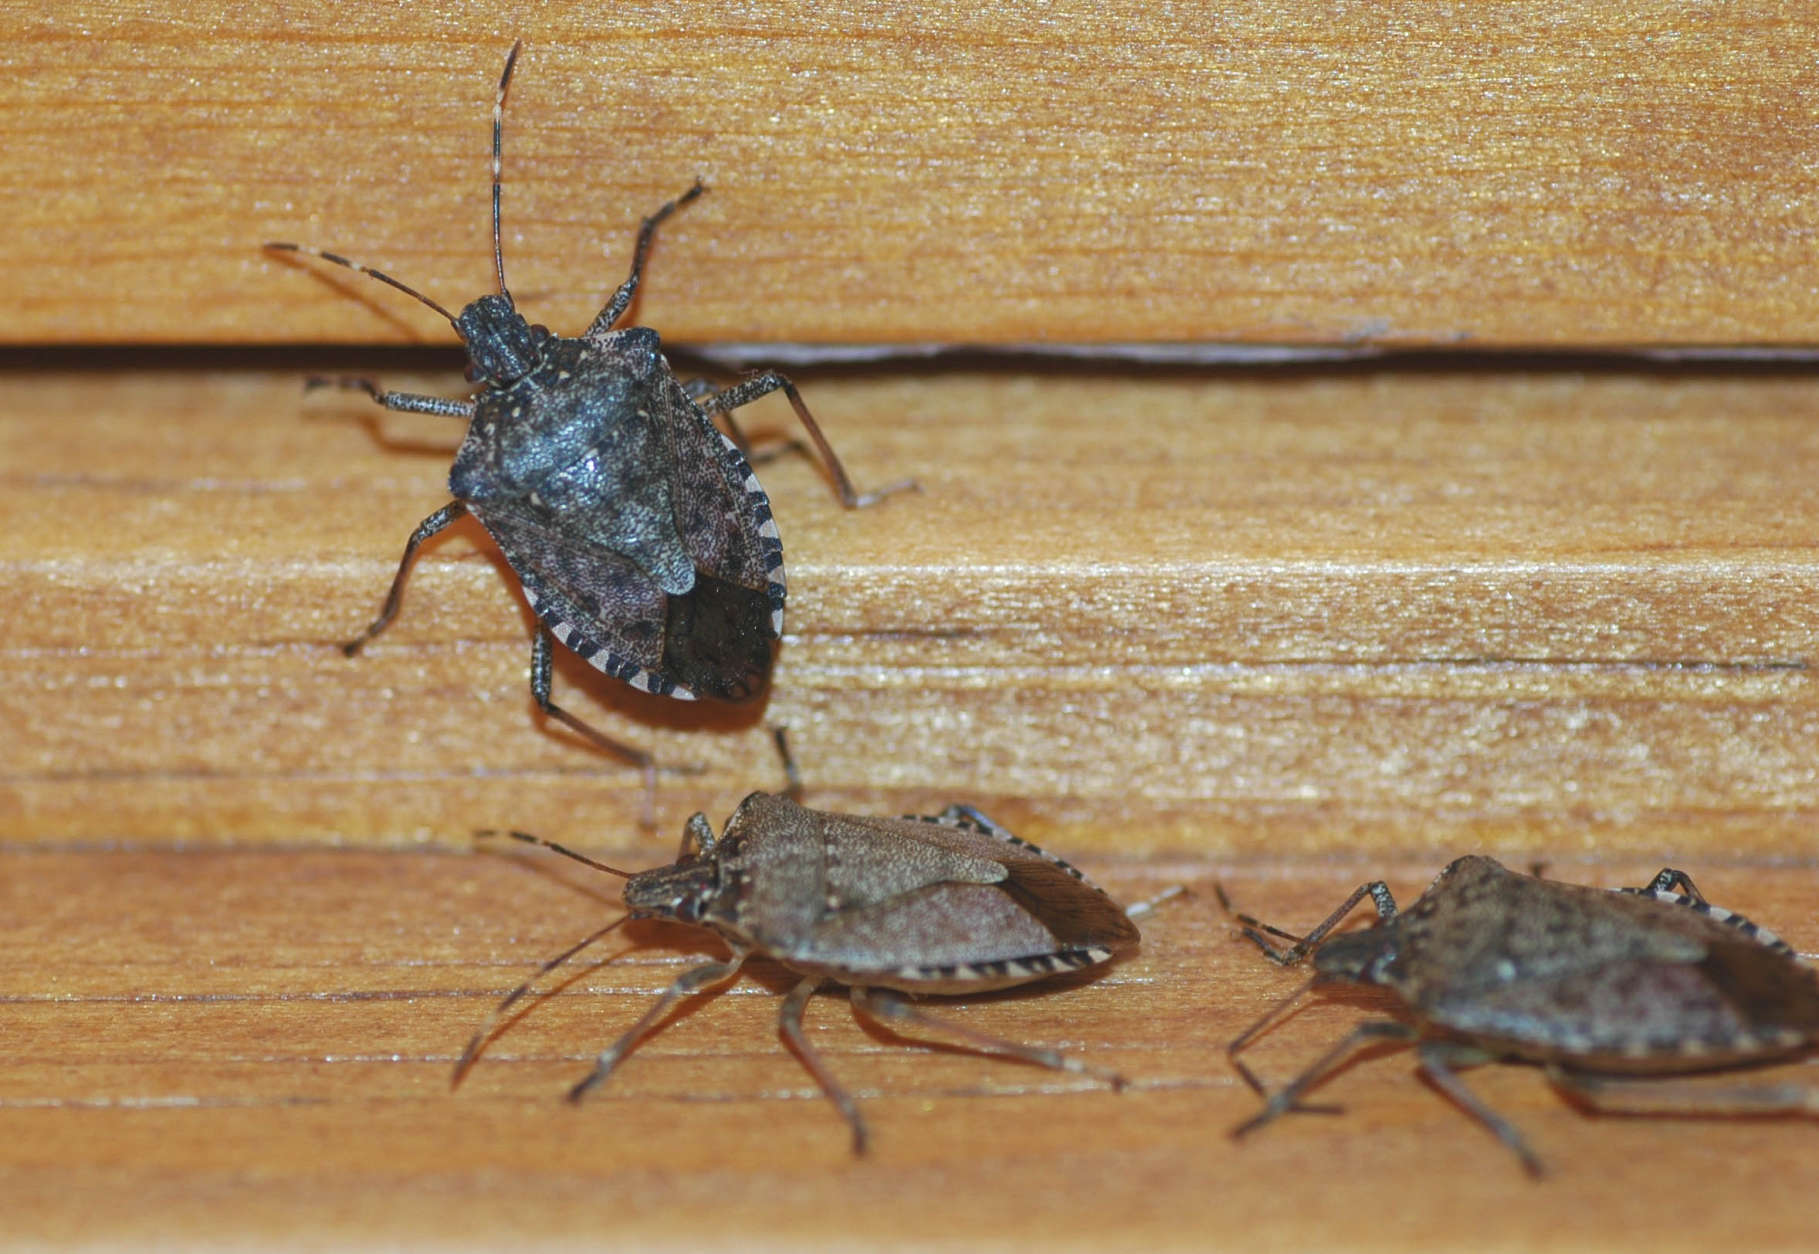 With warm weather stink bugs will soon emerge. Temperatures must drop to single digits to kill stink bugs in unprotected locations outdoors.  (Photo courtesy Mike Raupp)